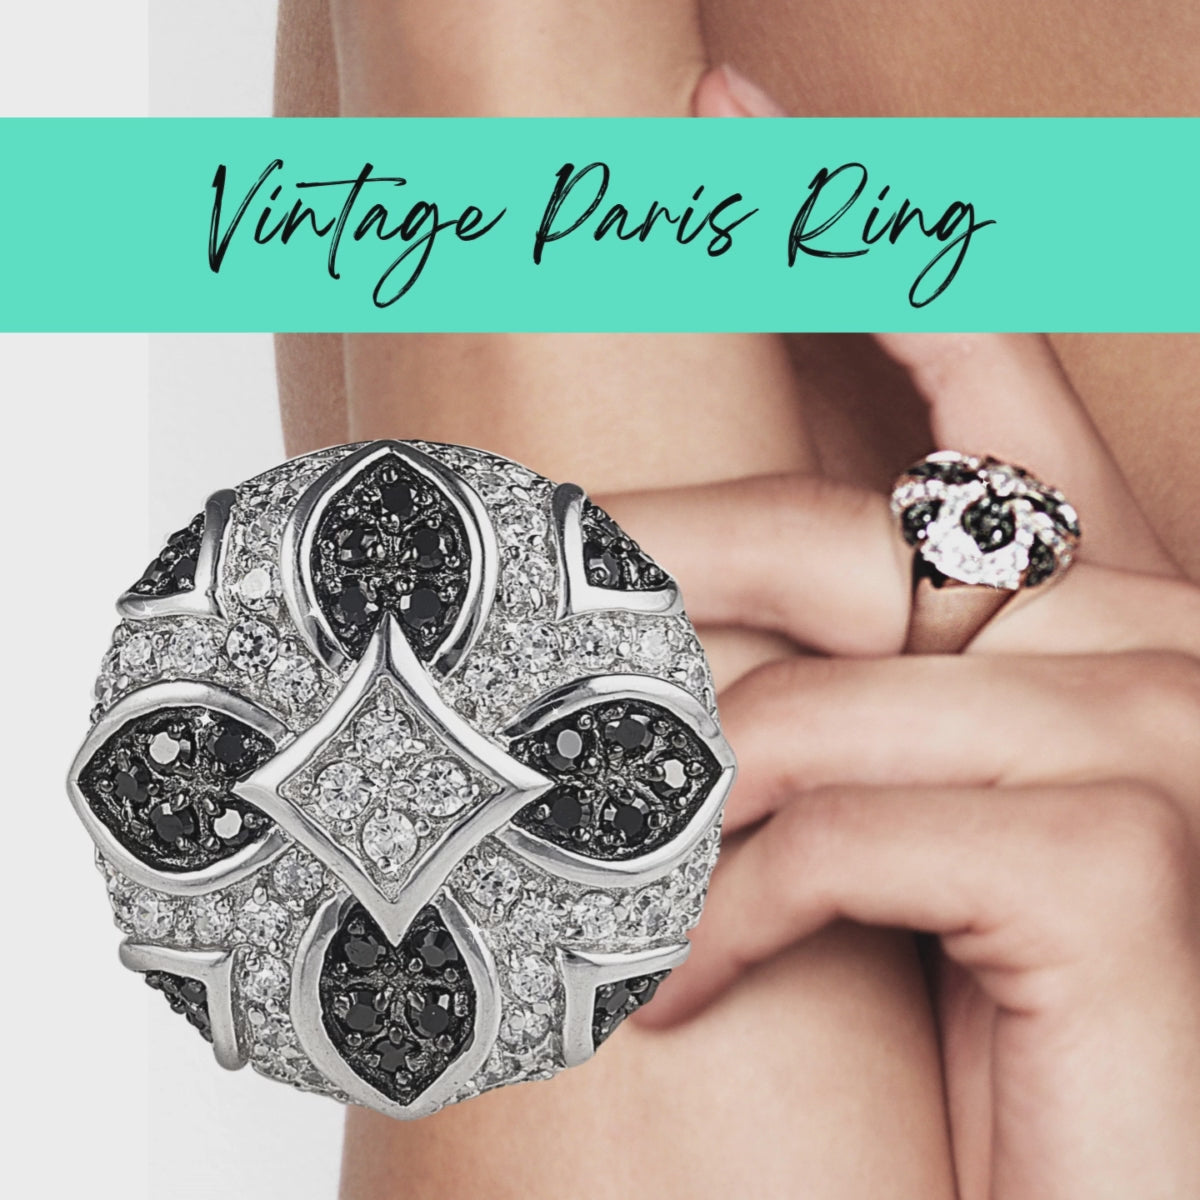 A Parisian work of art - this 925 Sterling Silver ring features a vintage geometric design dripping with black and clear facet cut Cubic Zirconia stones. Worldwide shipping.